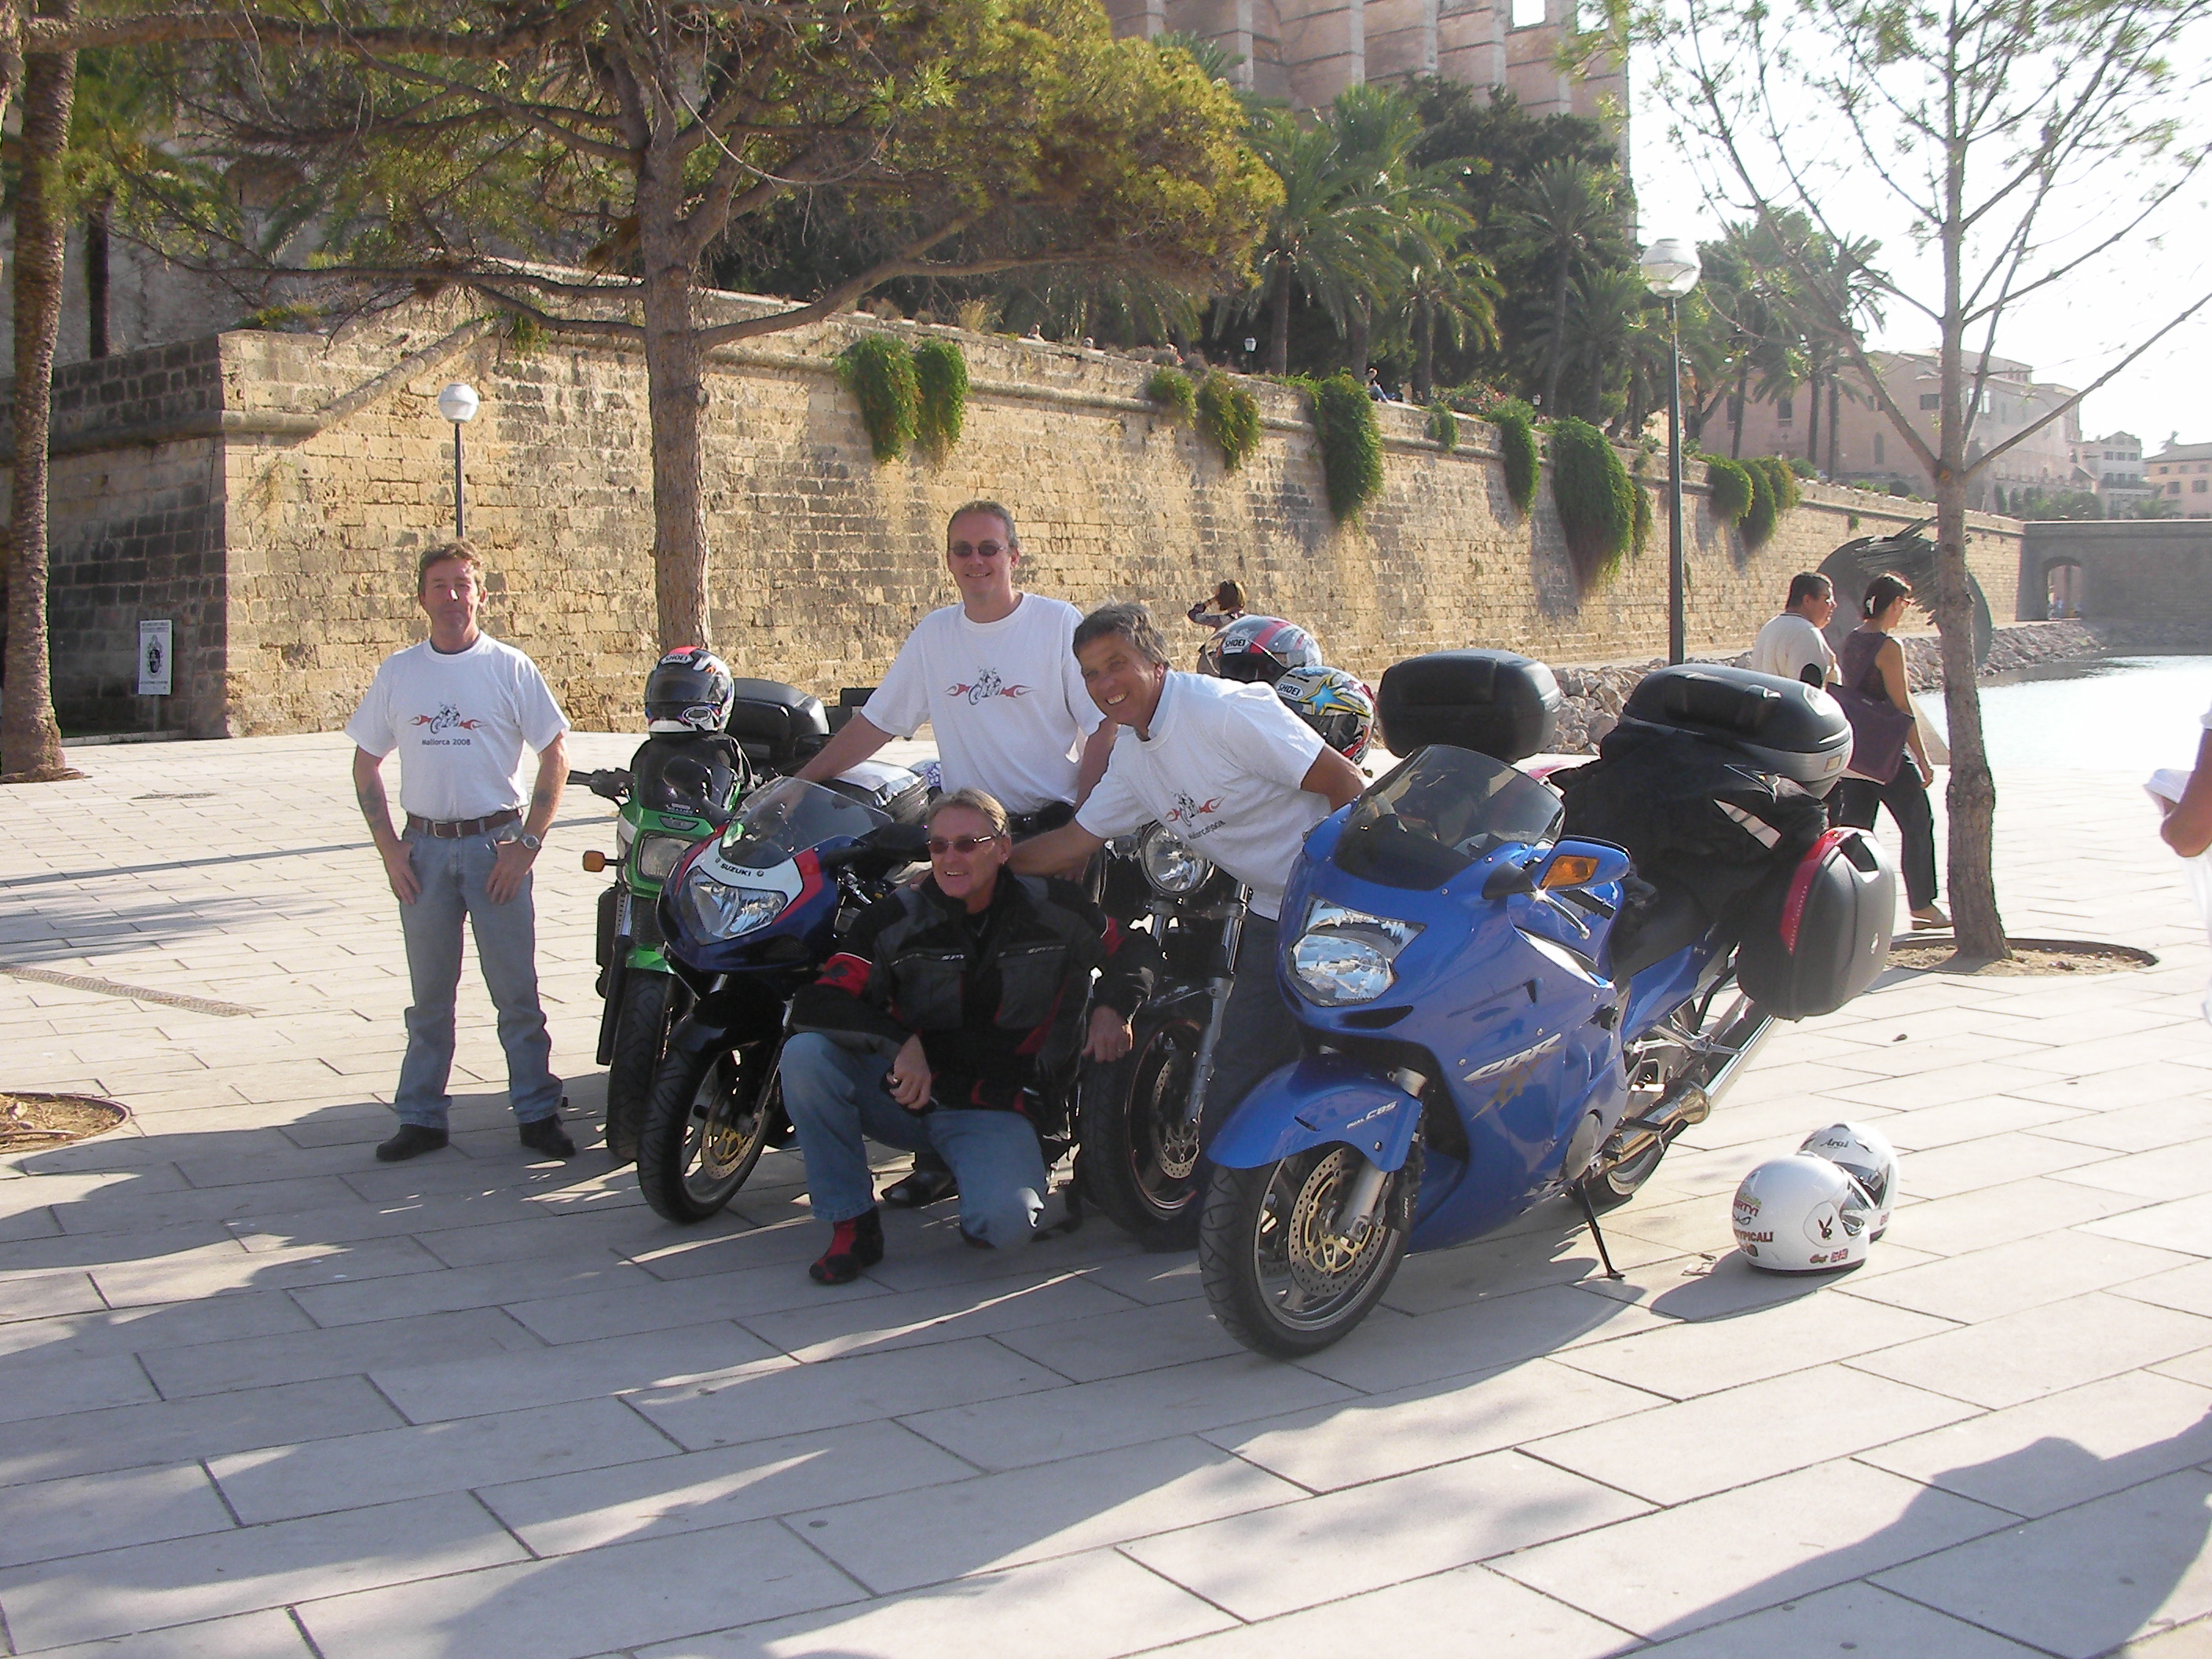 Motorcycles outside the cathederal in Palma Mallorca.